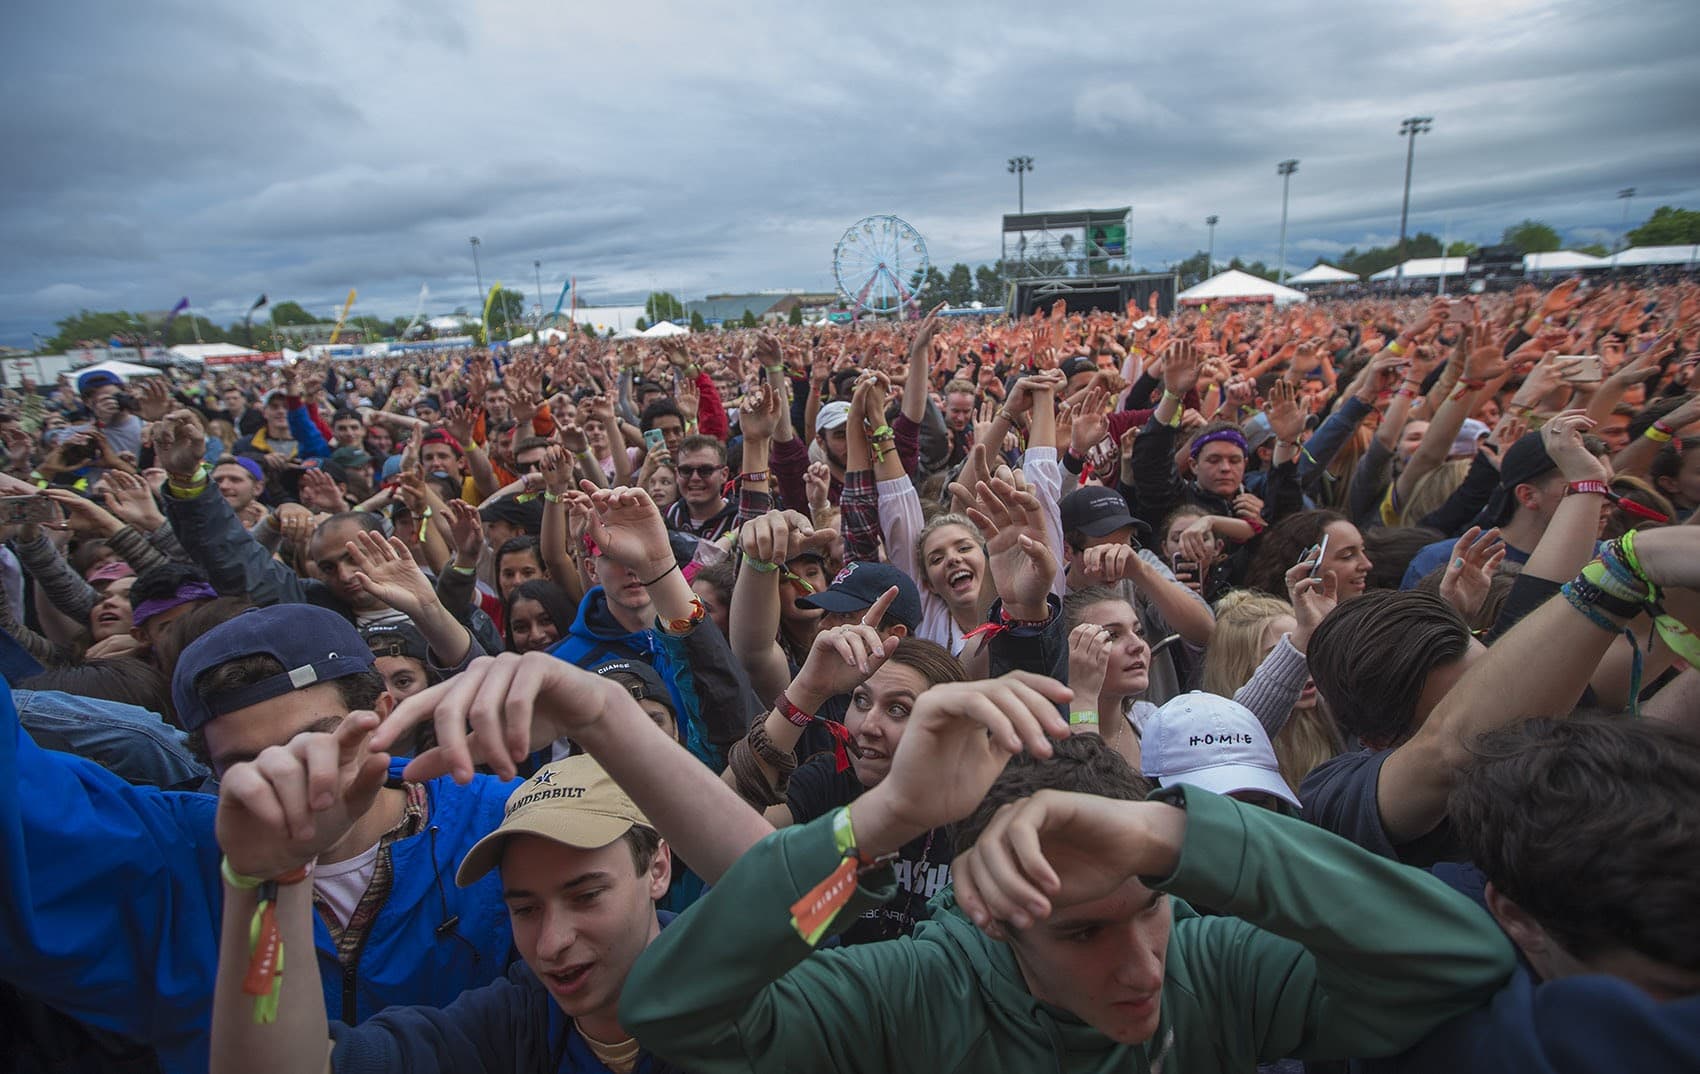 The crowd at Boston Calling Friday night with hands in the air. (Jesse Costa/WBUR)